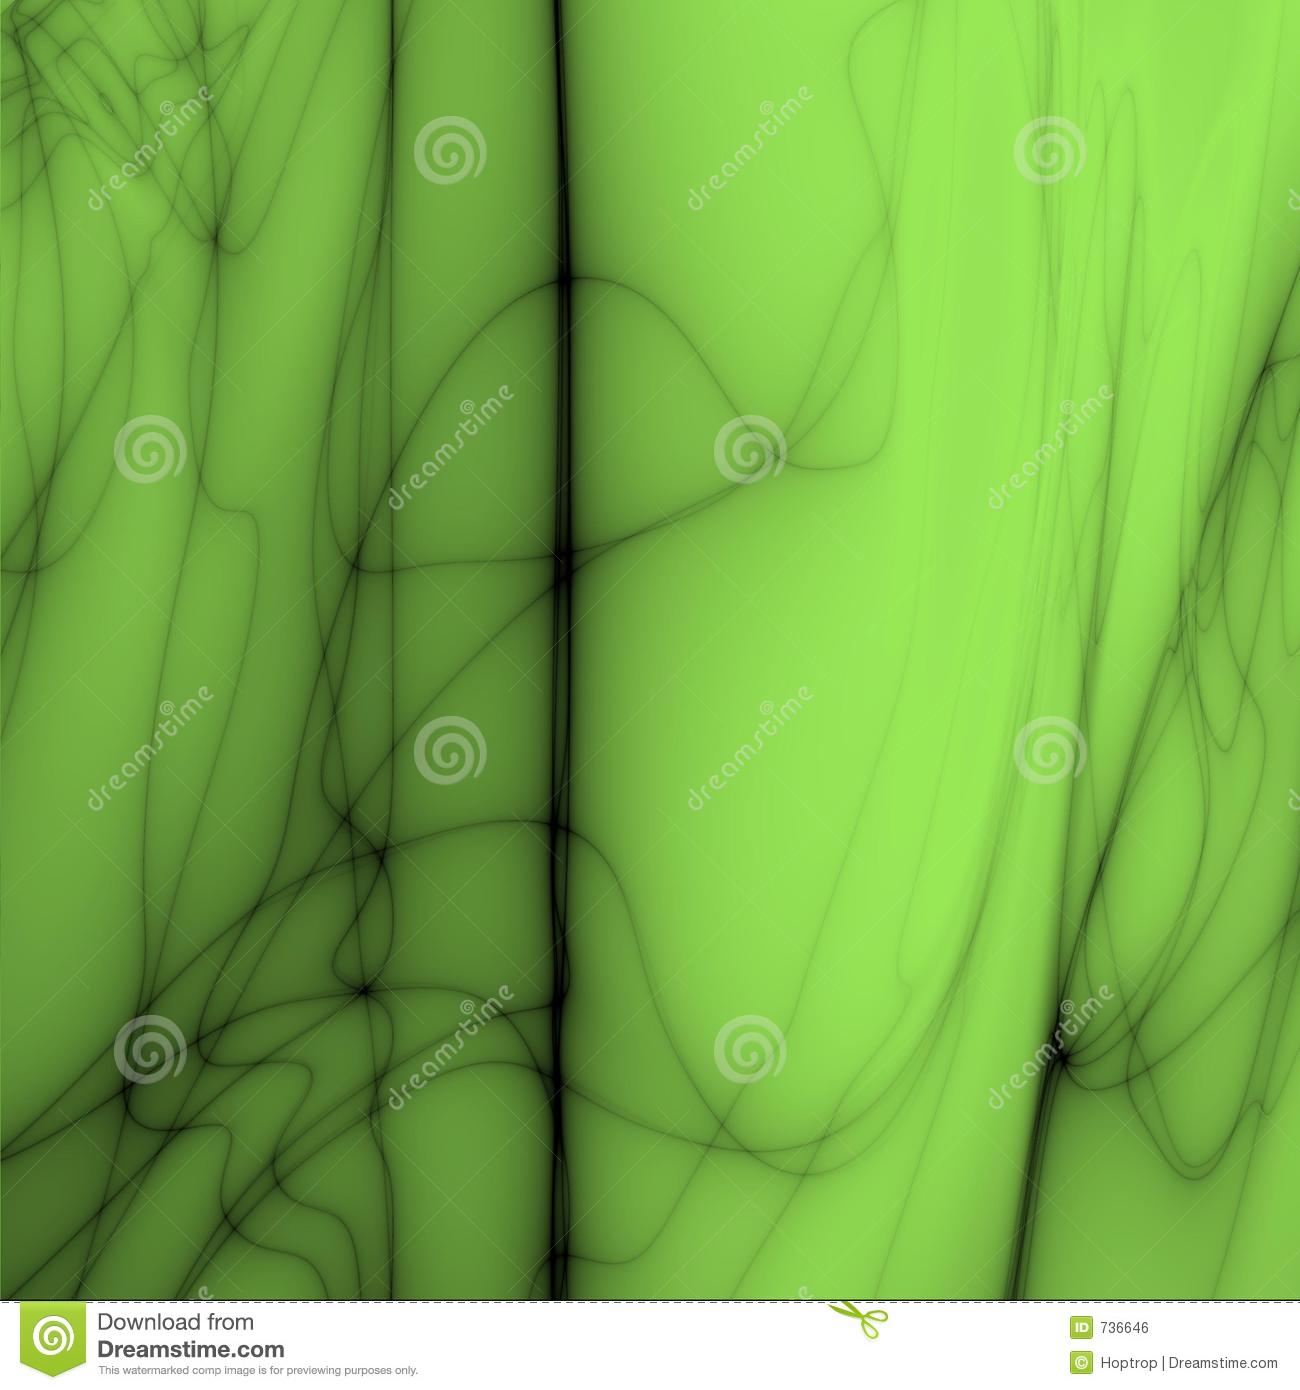 Green Glow Lines Royalty Free Stock Image   Image  736646